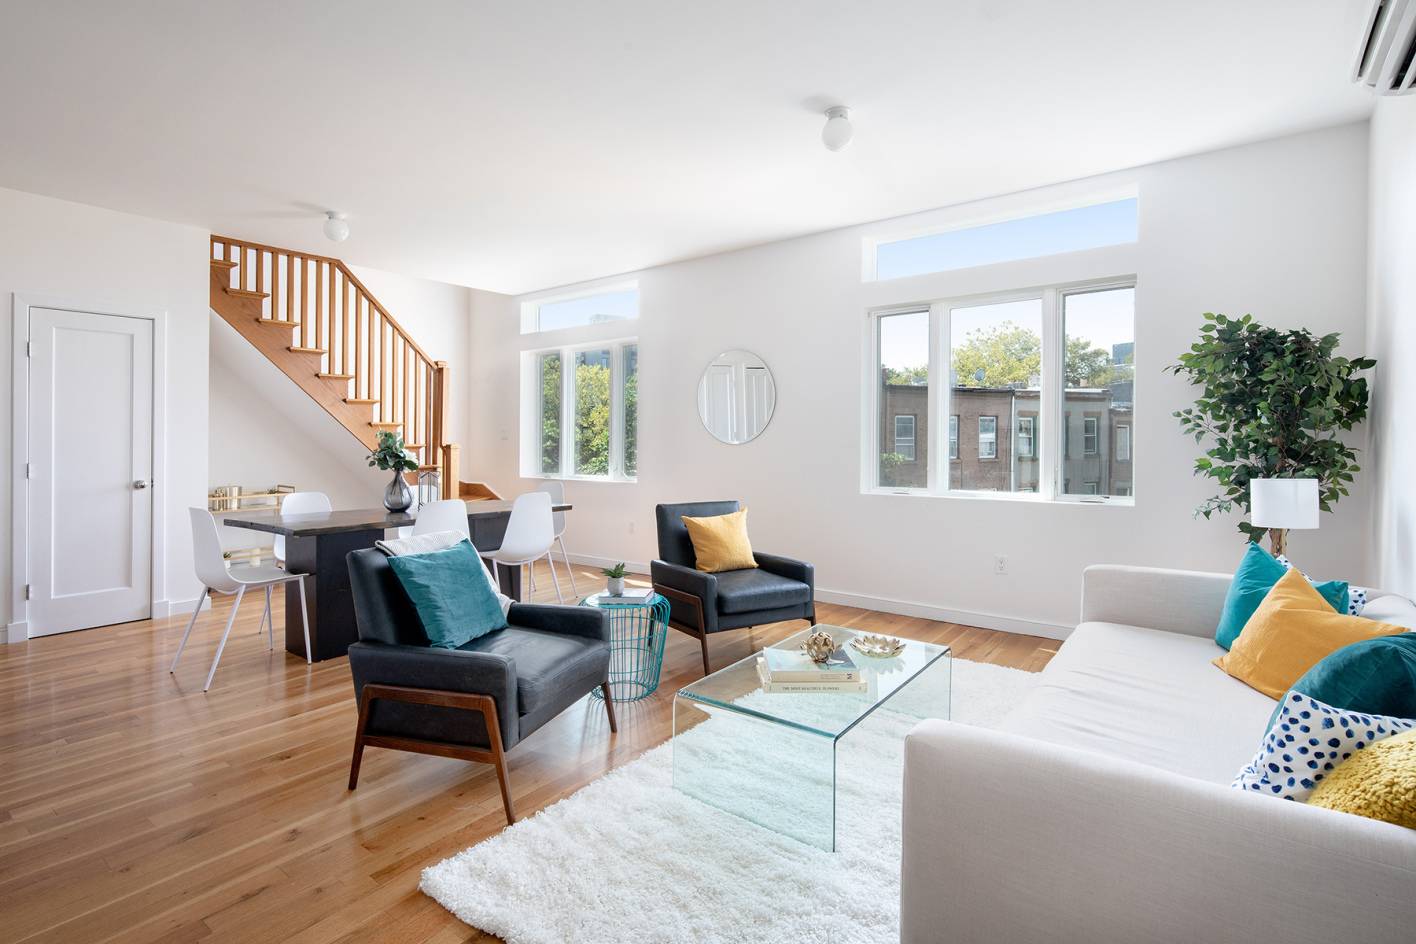 Make your penthouse dreams come true in this three bedroom, two and half bathroom duplex home with a sprawling private roof deck, all located within an outstanding Clinton Hill condominium.